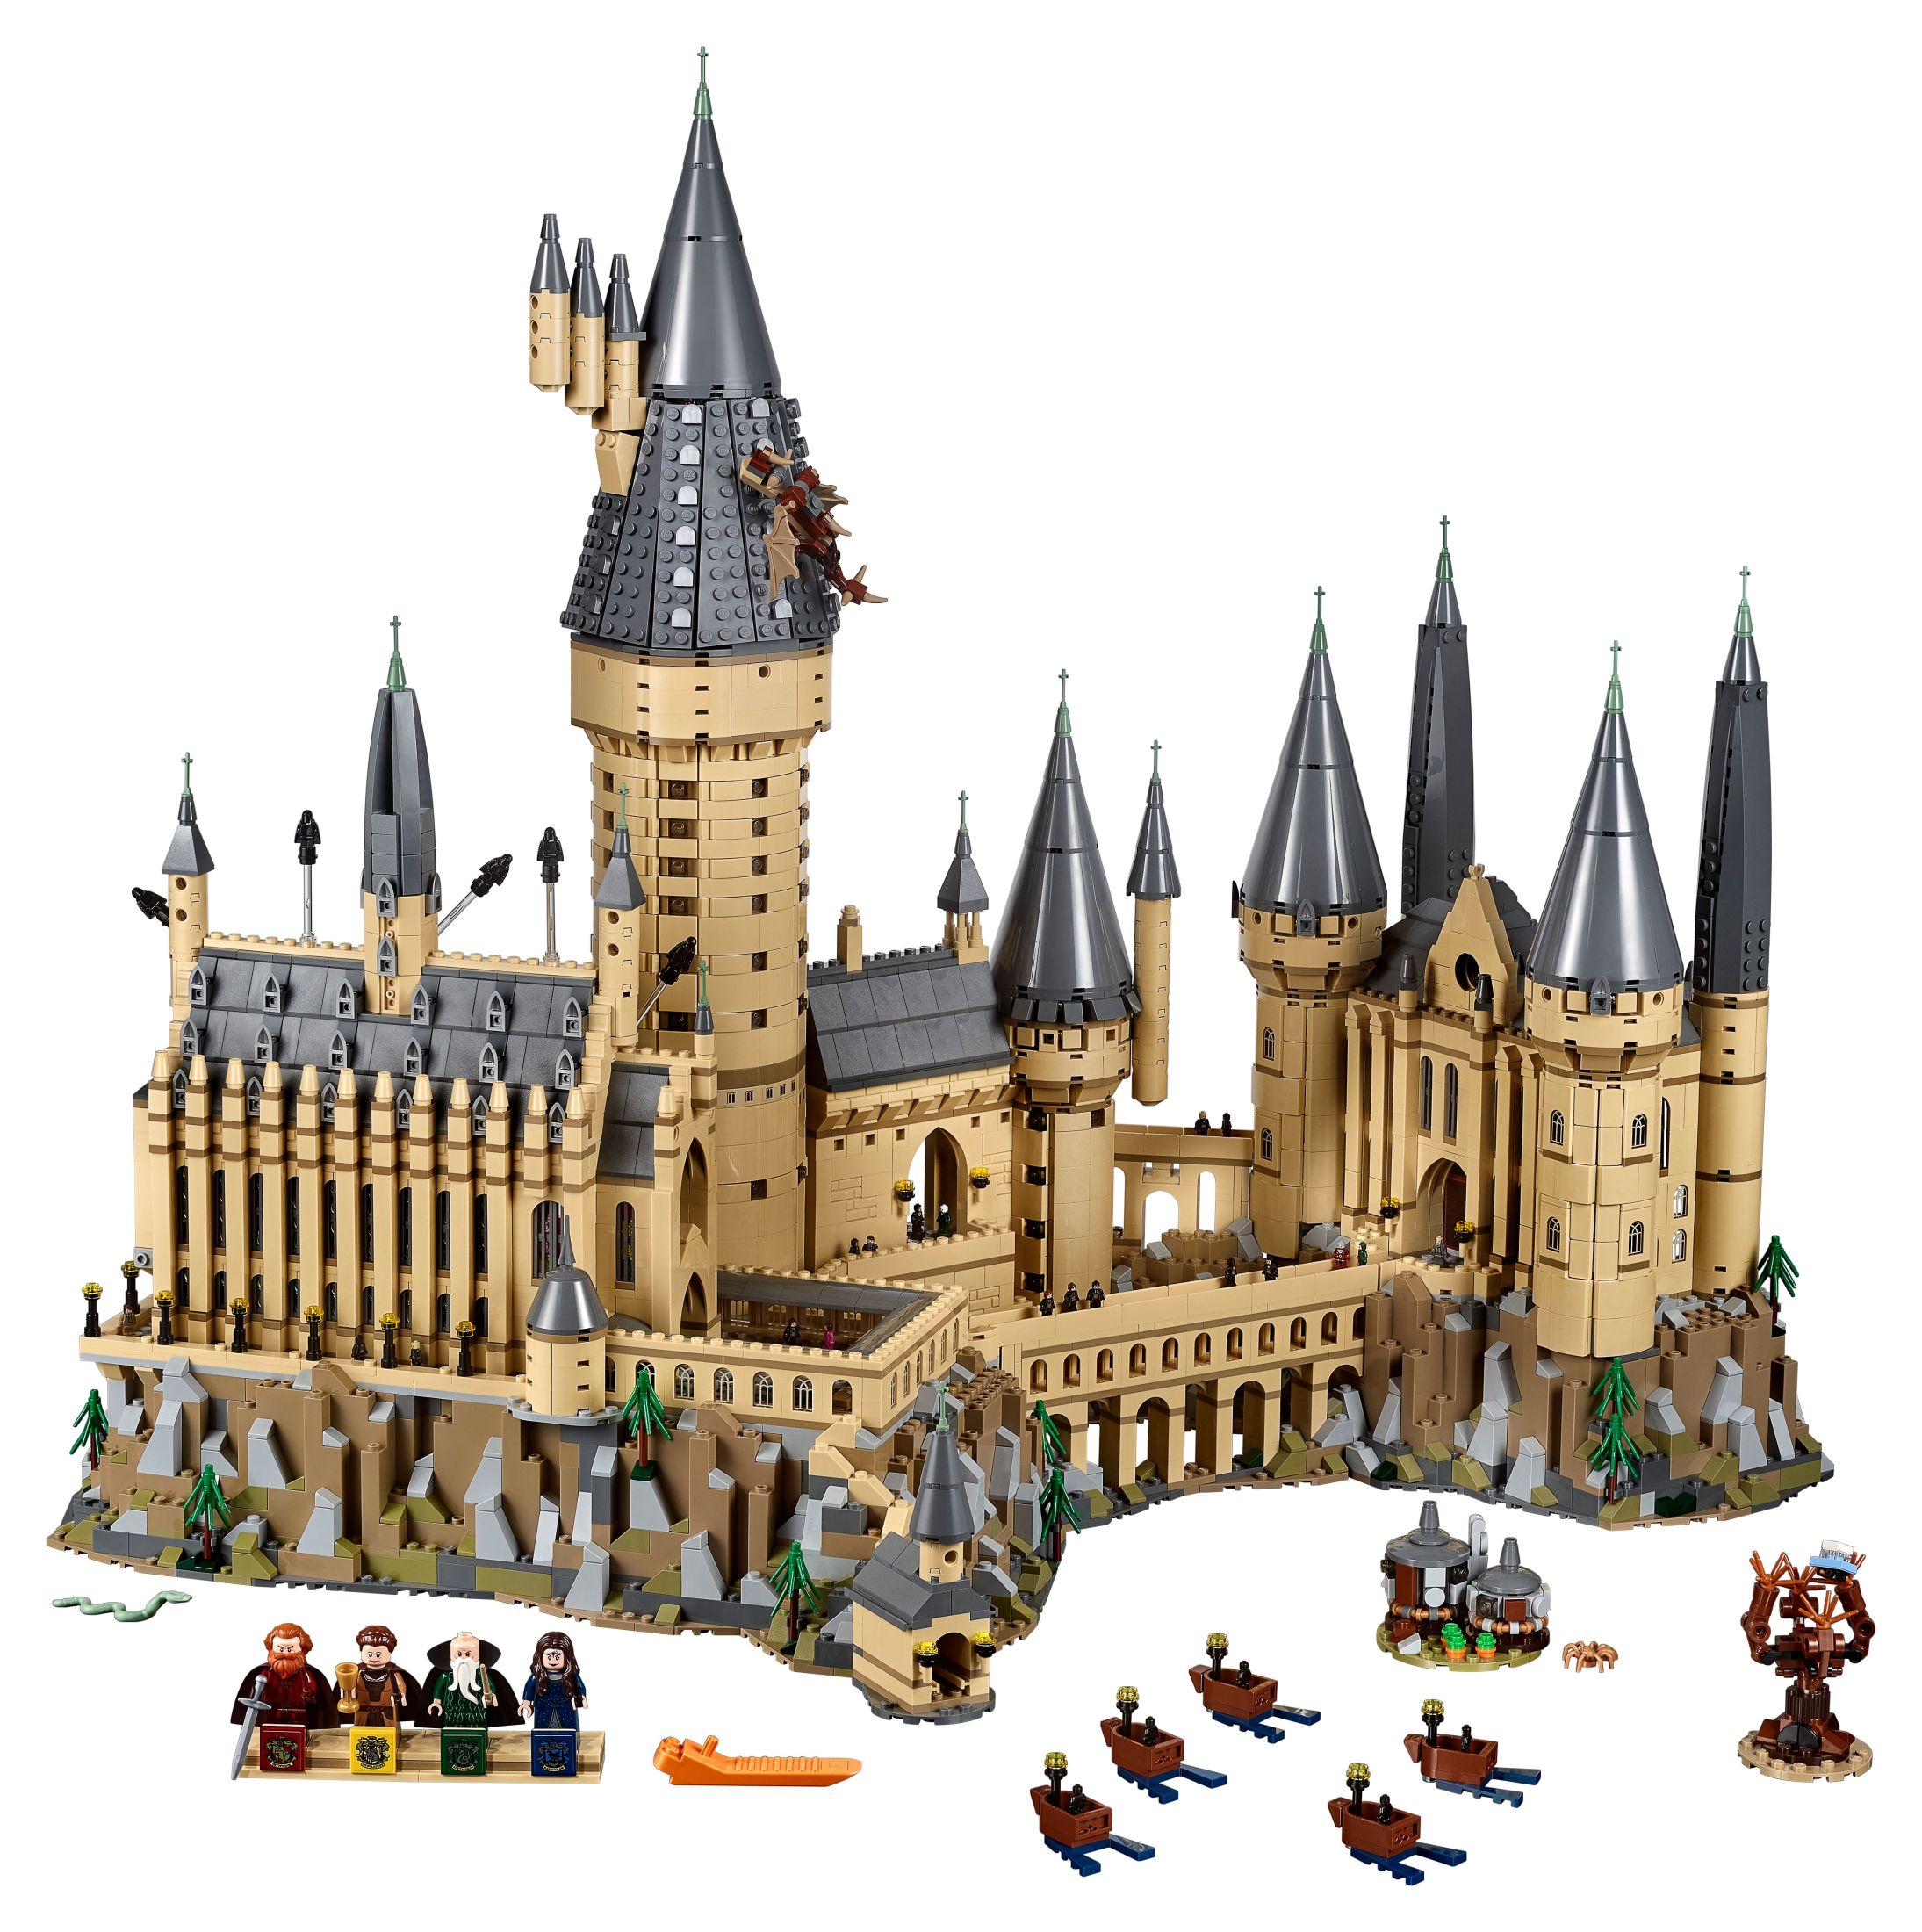 LEGO Harry Potter Hogwarts Castle 71043 Building Set - Model Kit with Minifigures, Featuring Wand, Boats, and Spider Figure, Gryffindor and Hufflepuff Accessories, Collectible for Adults and Teens - image 5 of 8